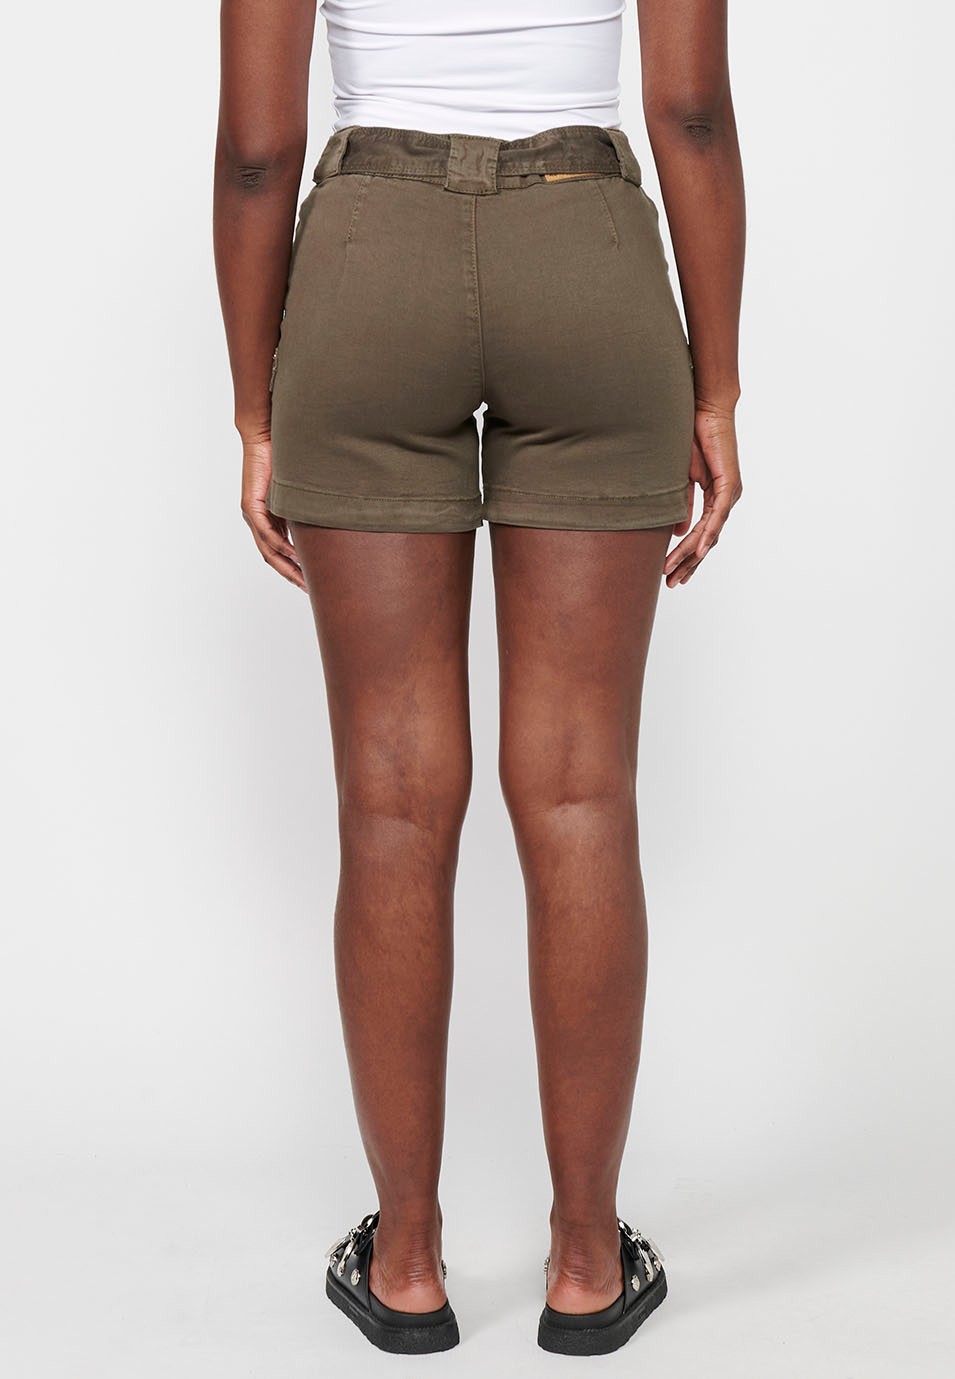 Shorts, pockets with floral embroidery. Adjustable waistband with belt, khaki color for women